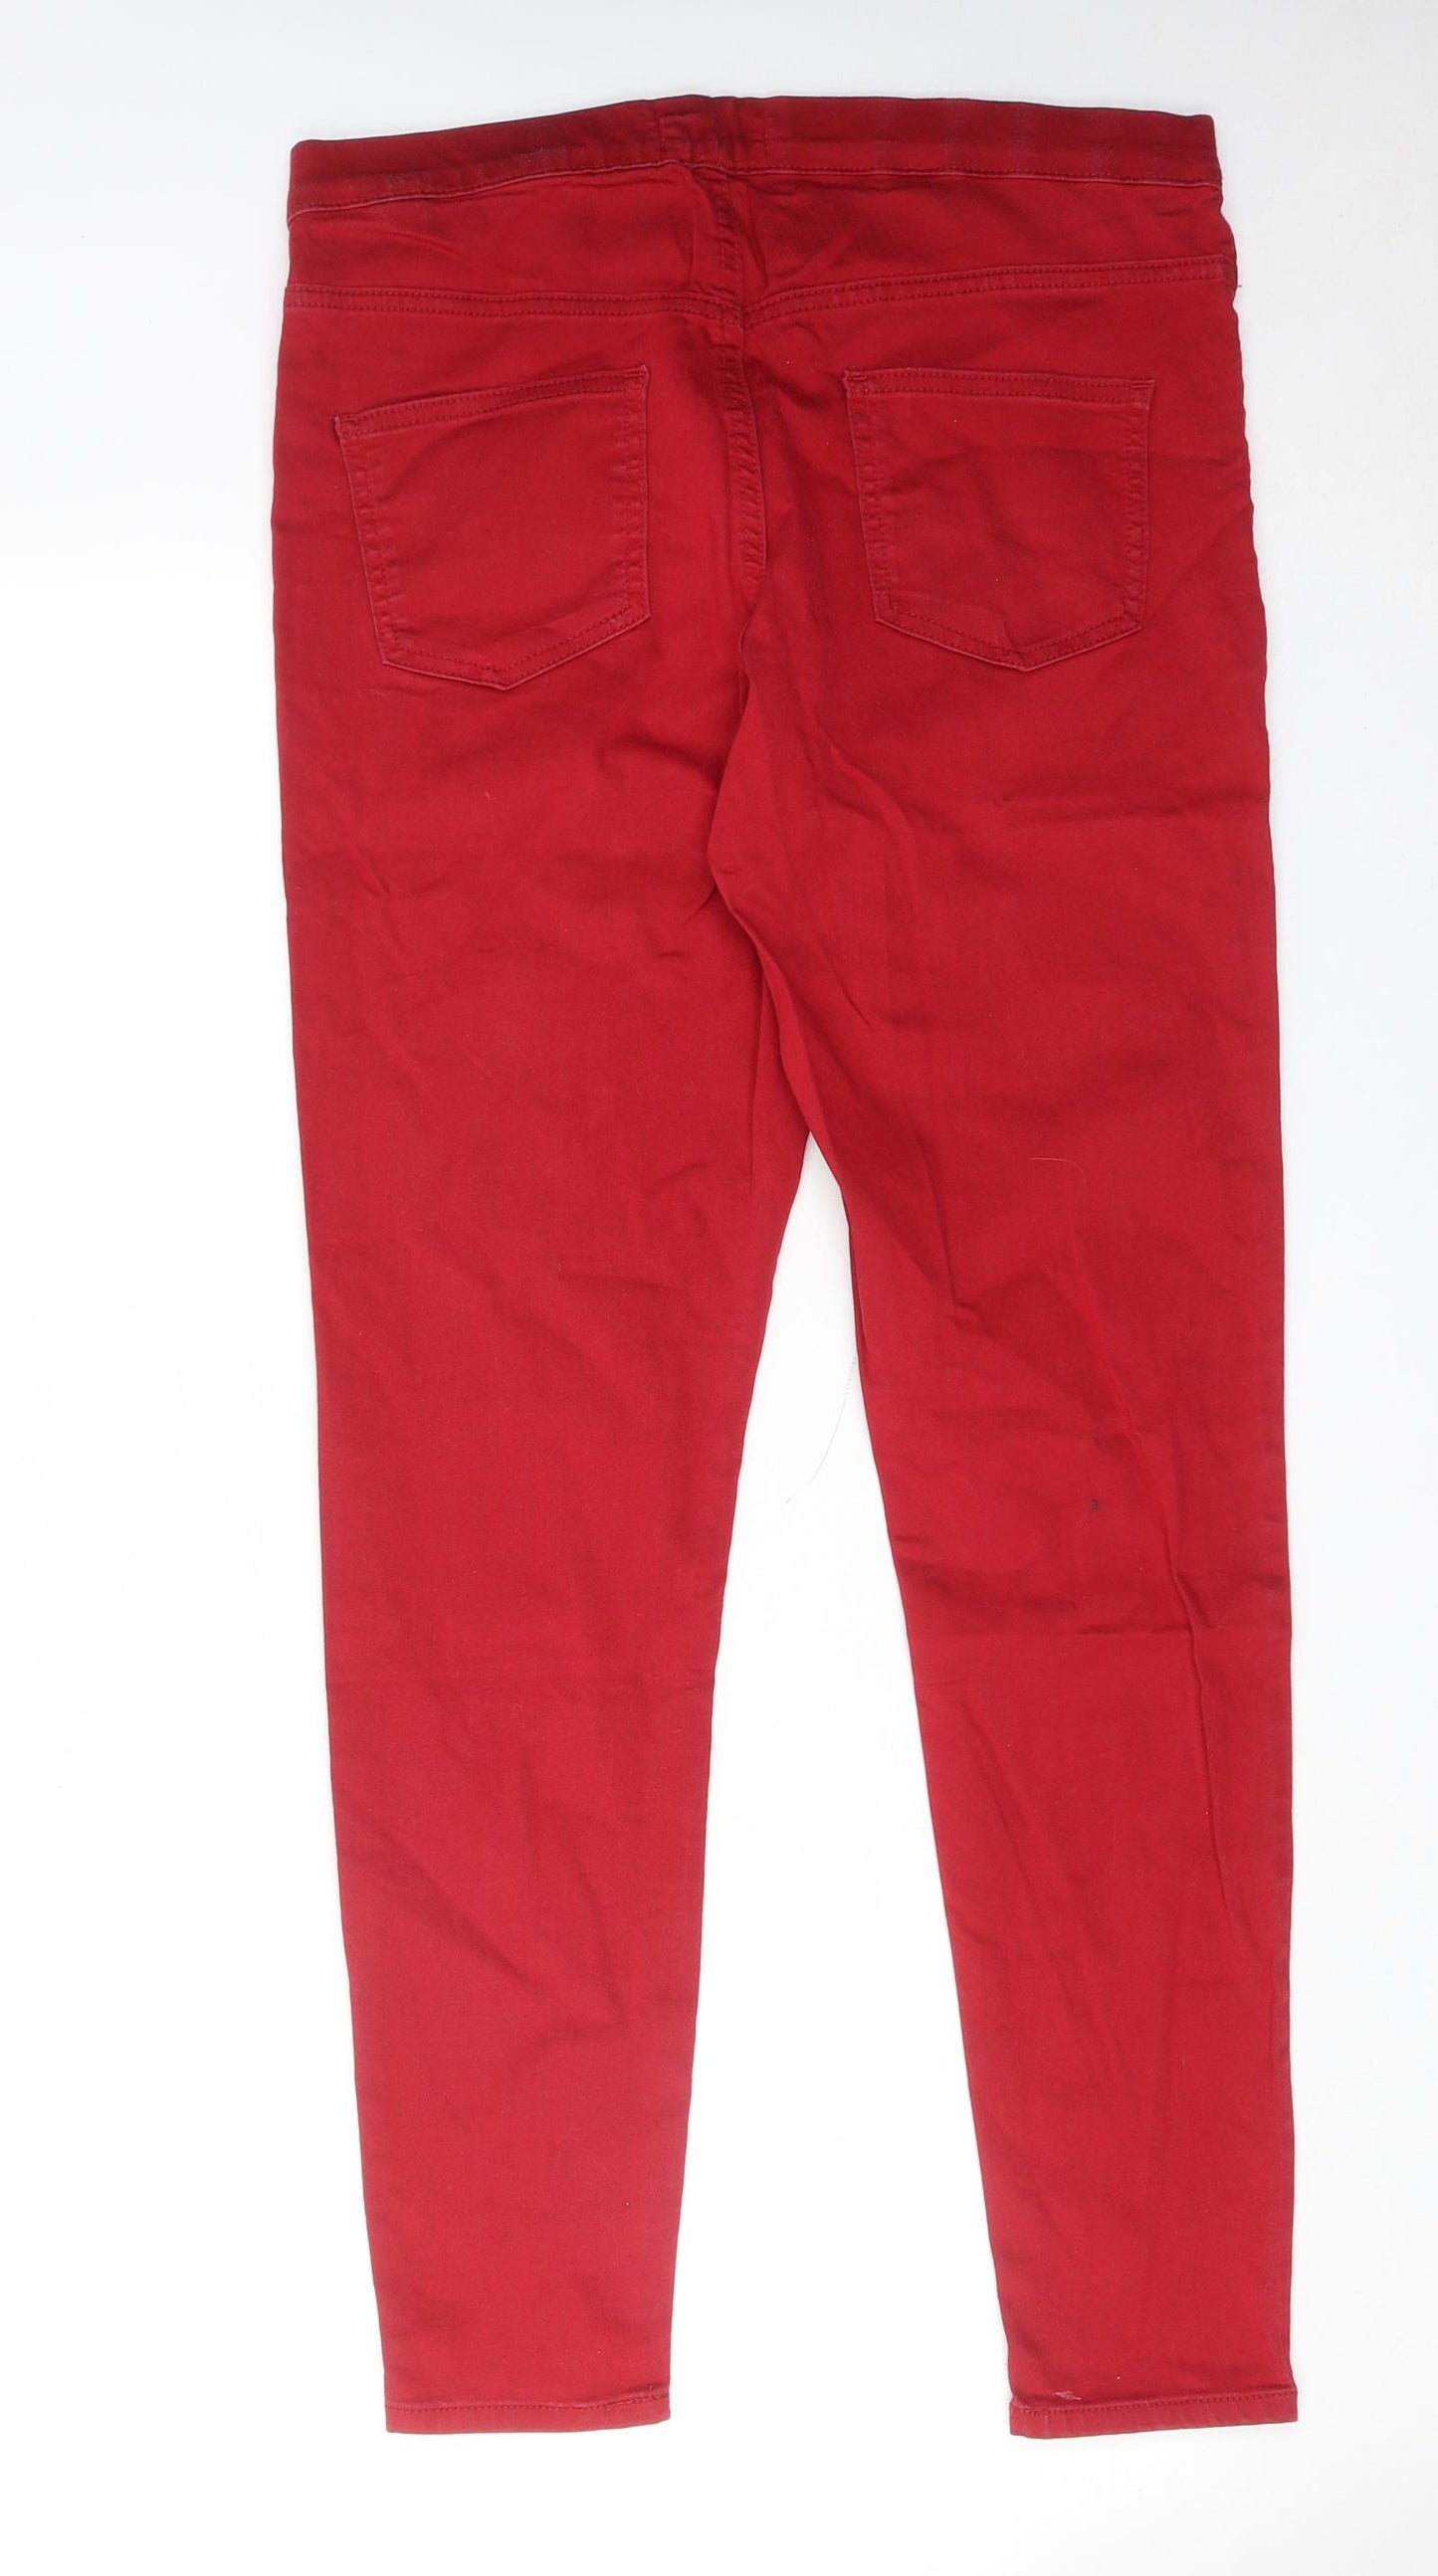 Marks and Spencer Womens Red Cotton Jegging Jeans Size 14 Regular